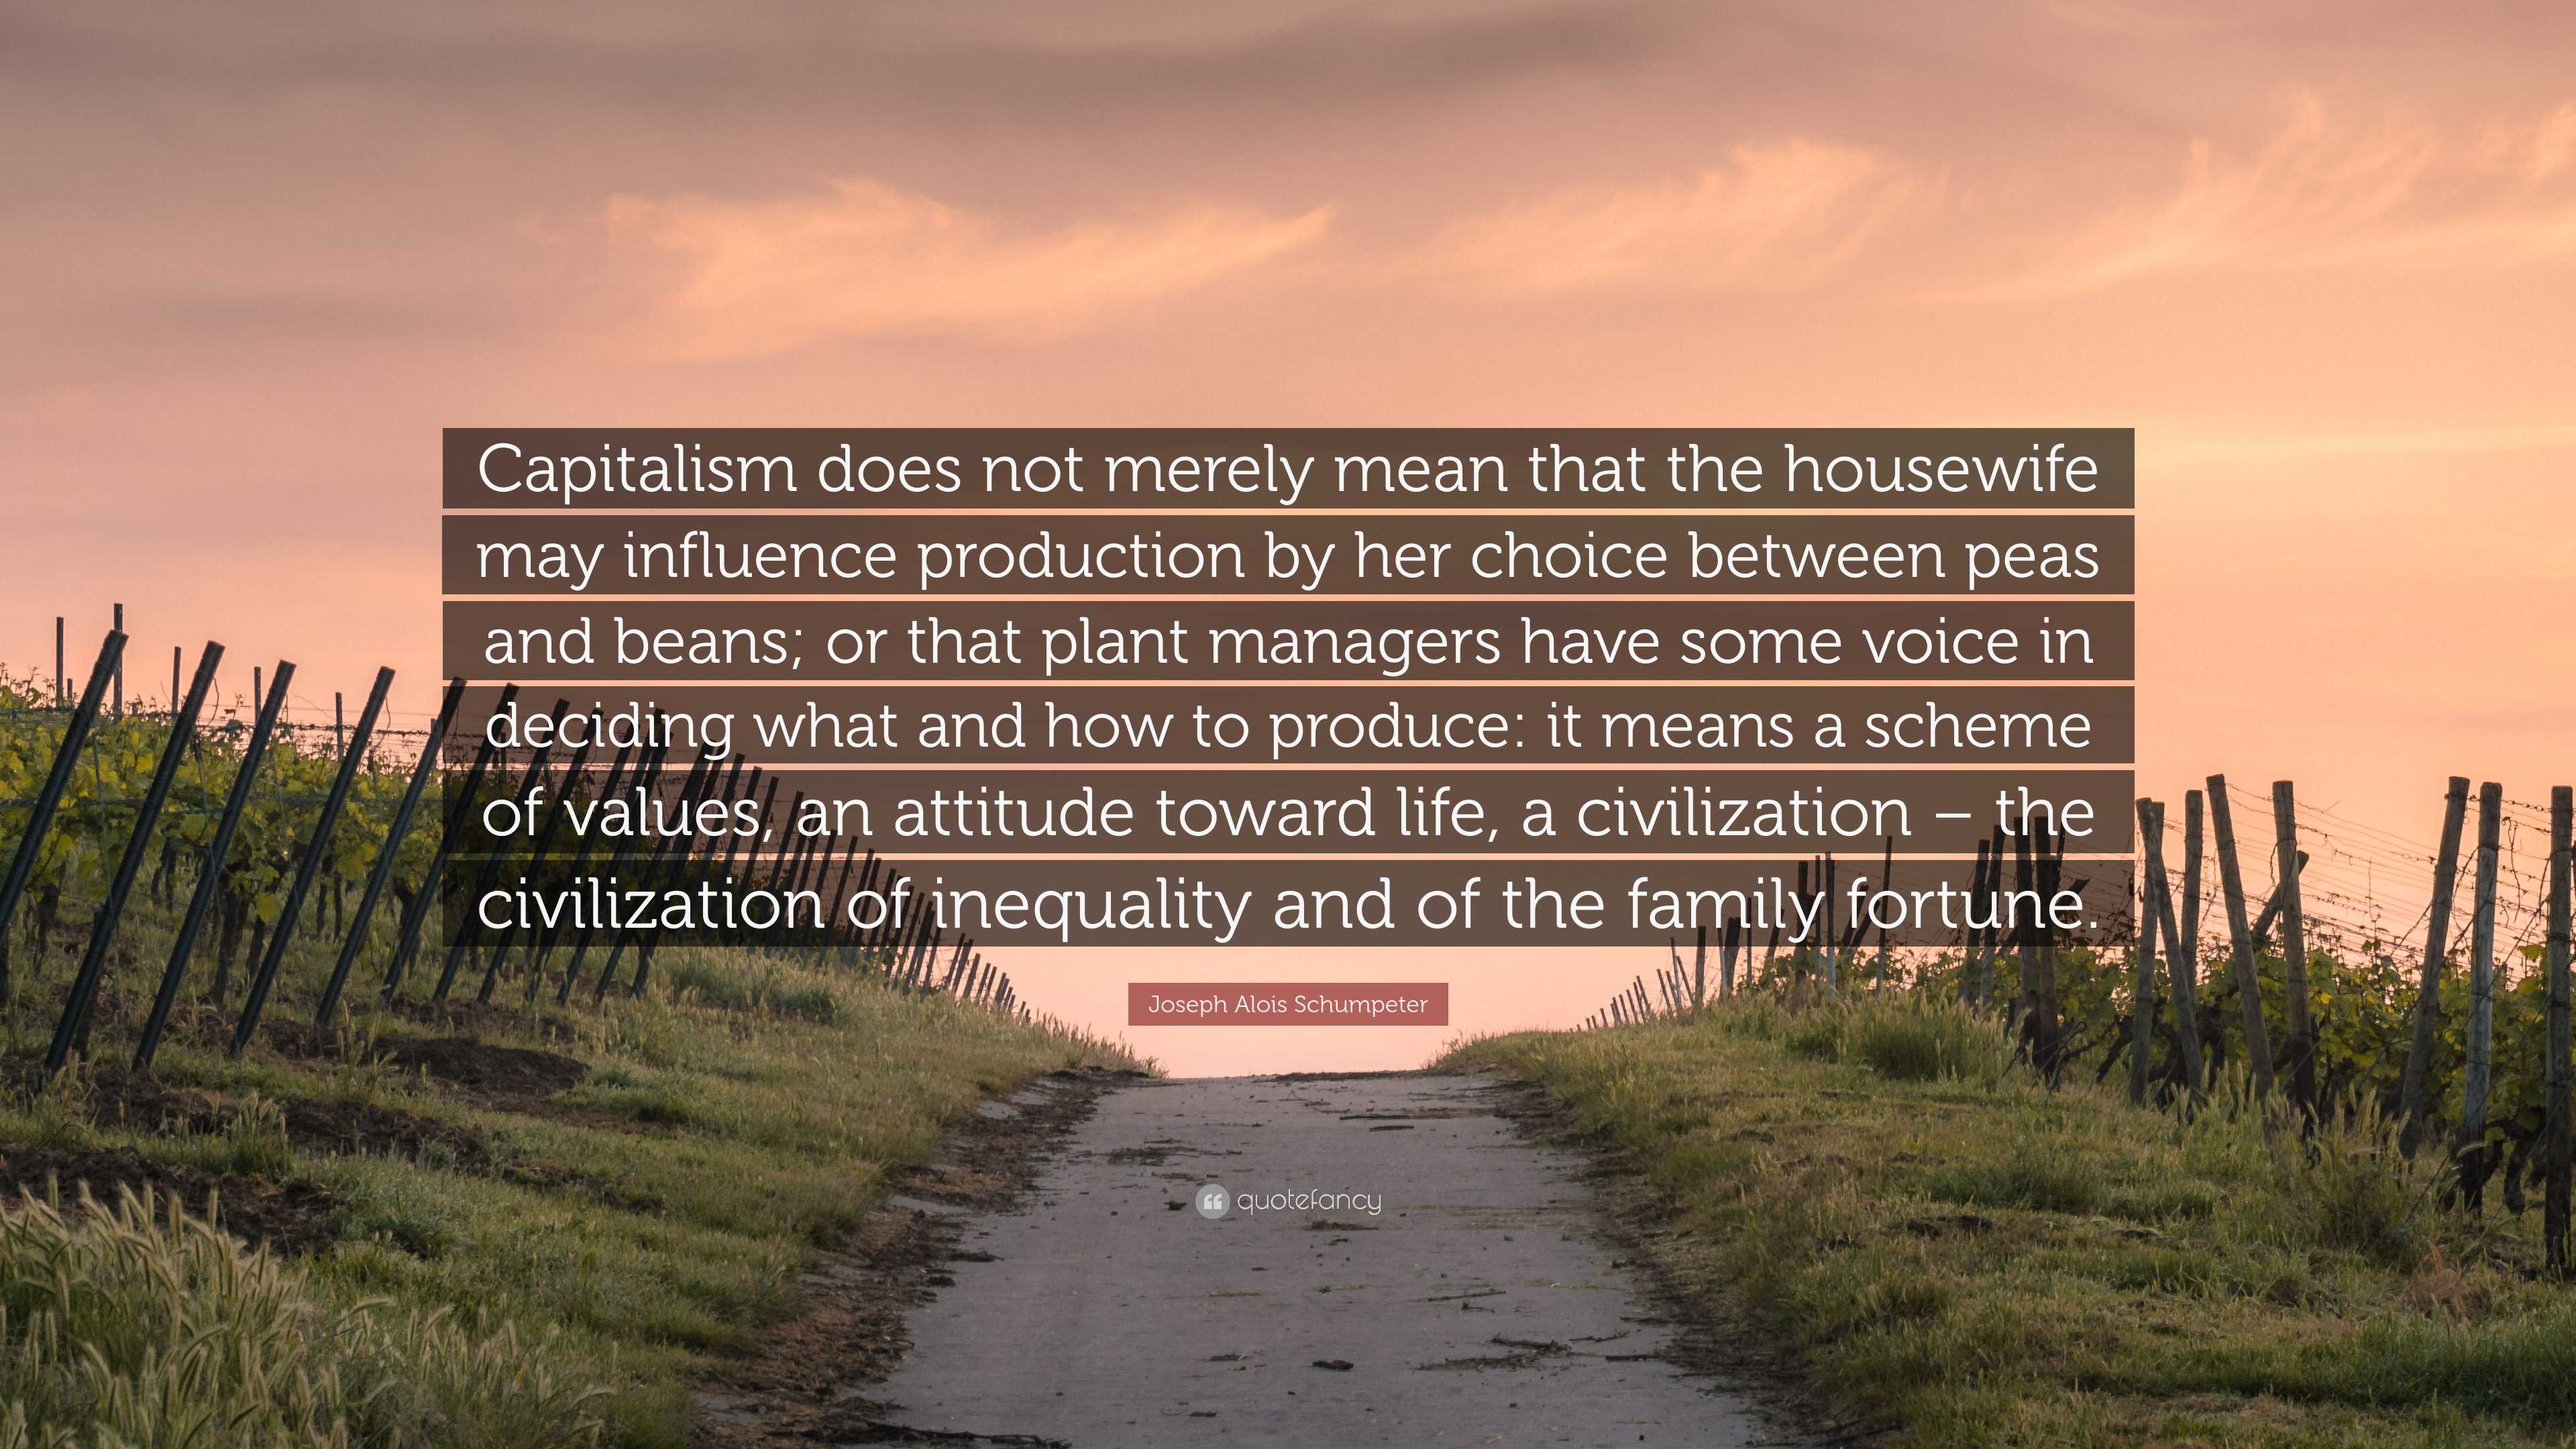 Joseph Alois Schumpeter Quote: “Capitalism does not merely mean that the  housewife may influence production by her choice between peas and beans; or  tha”